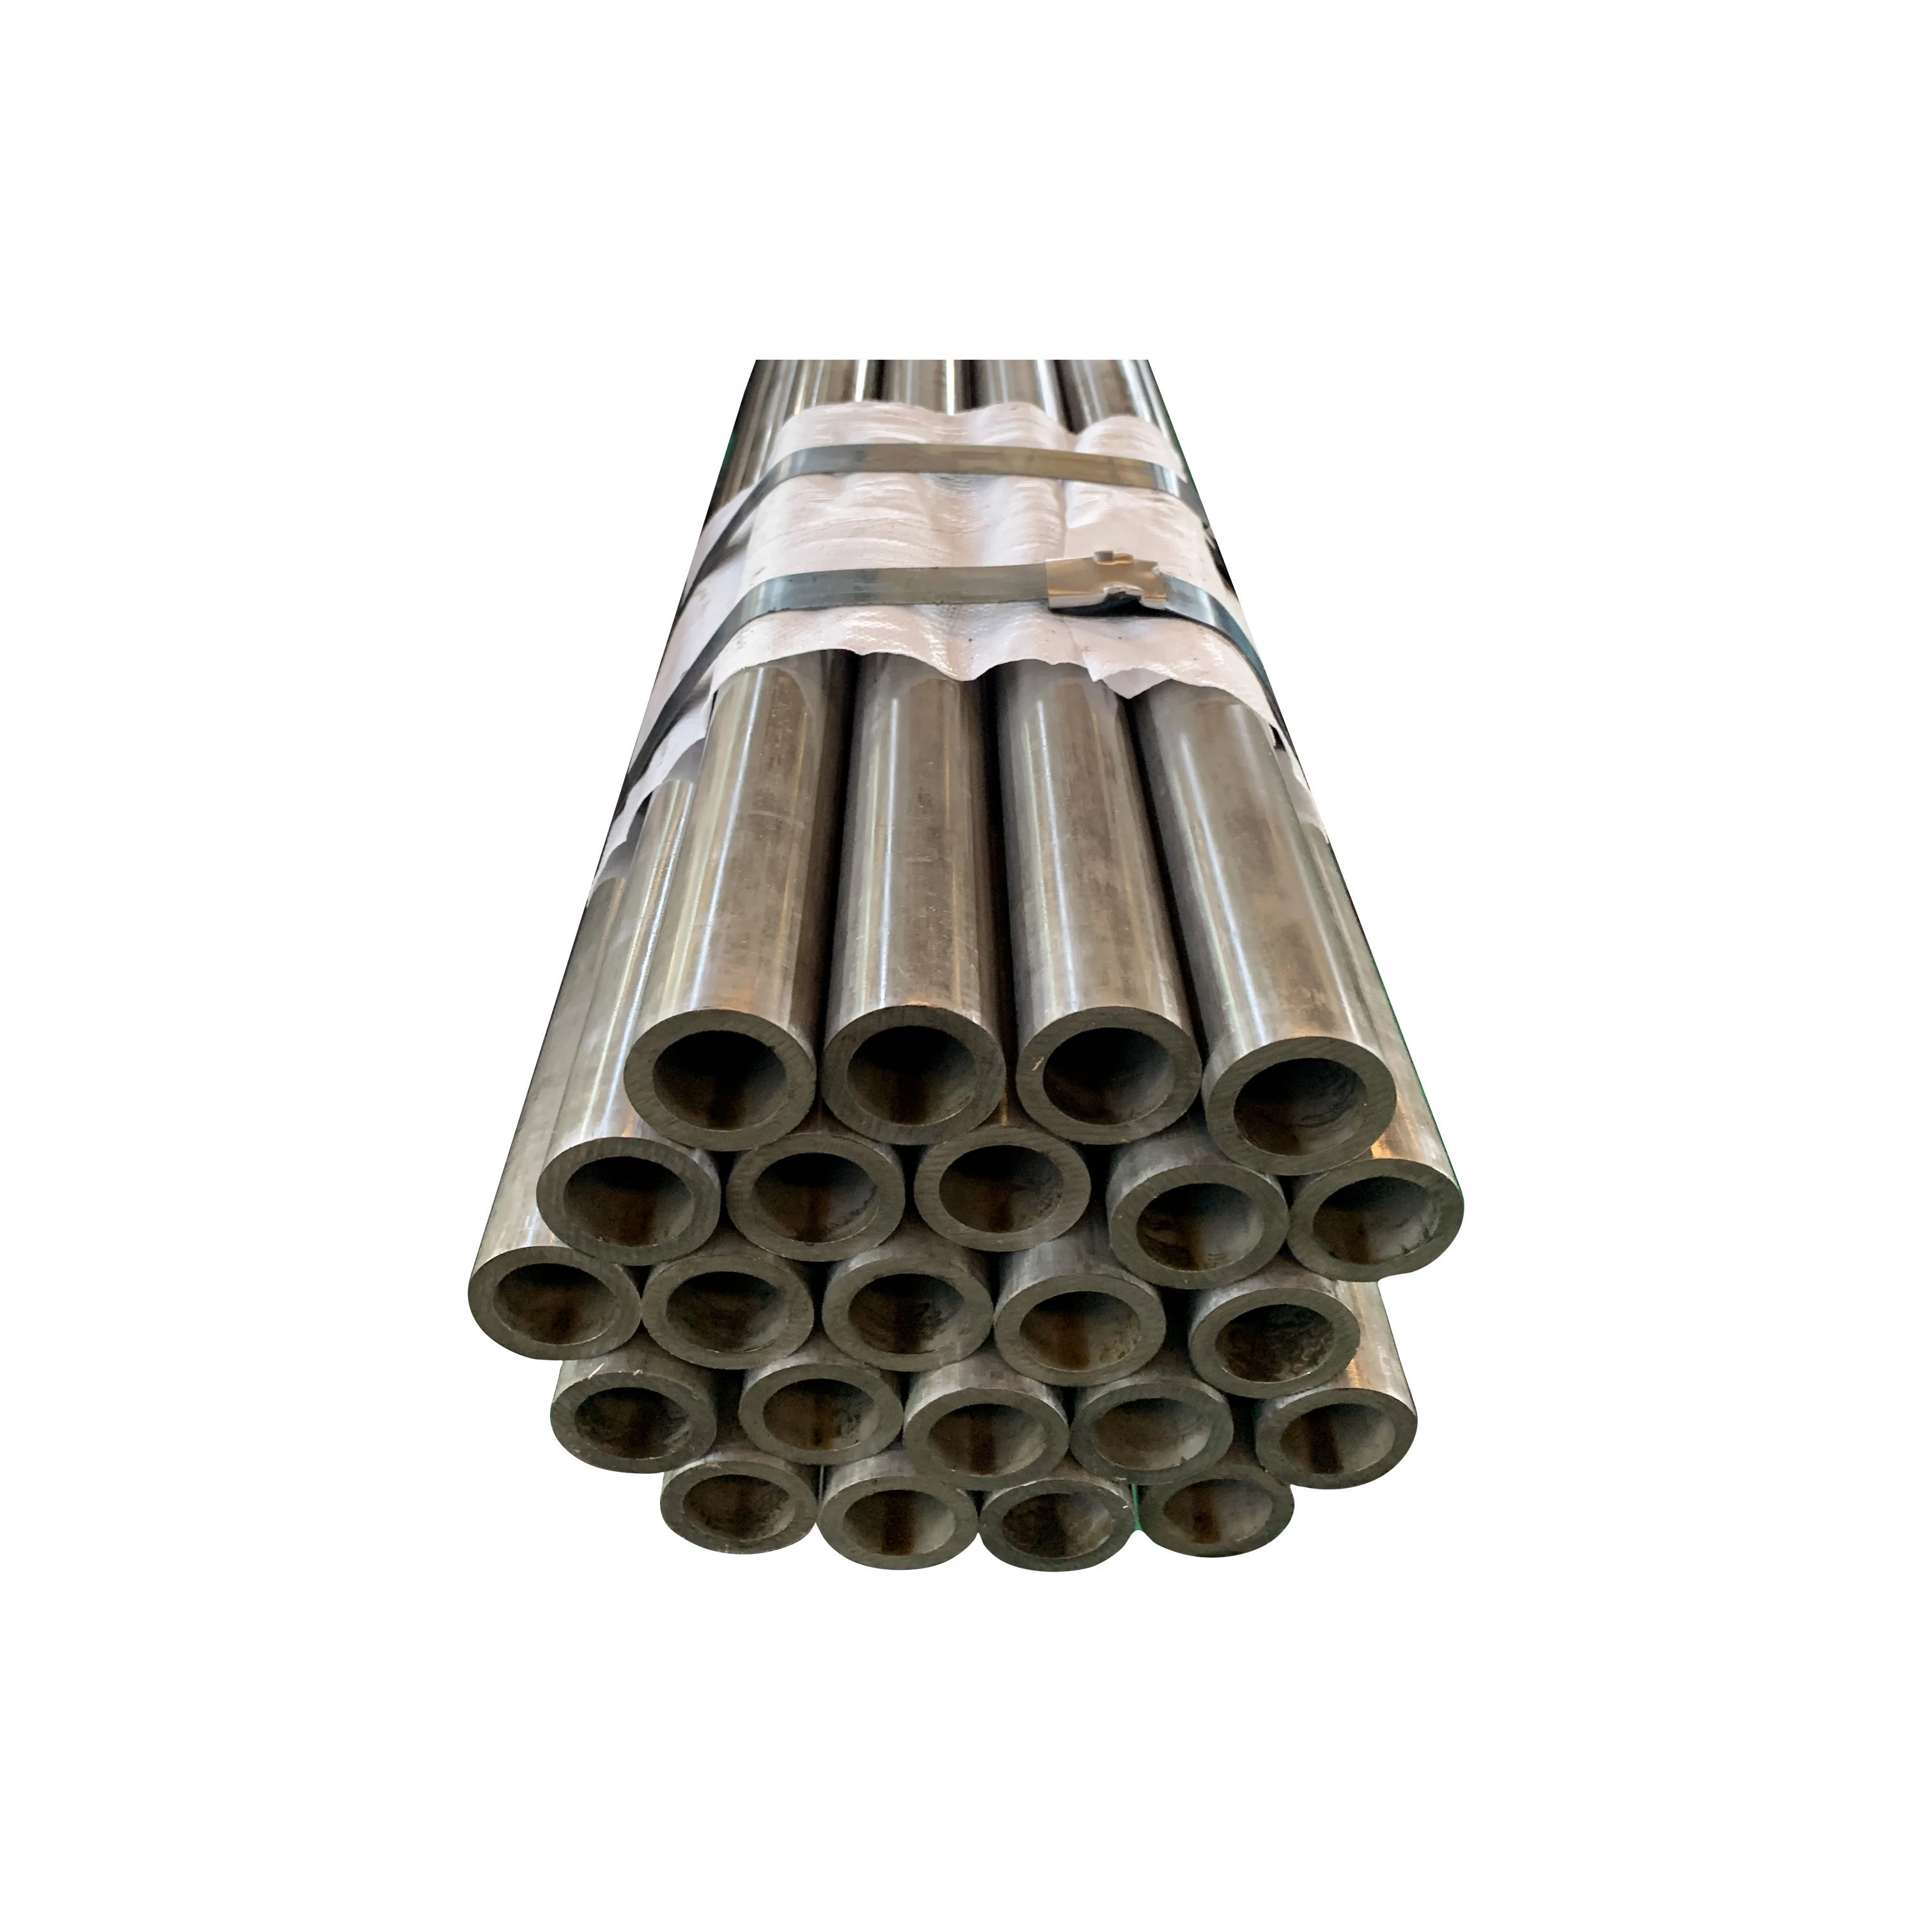 Din 2448 st35.8 seamless carbon steel pipe for boiler